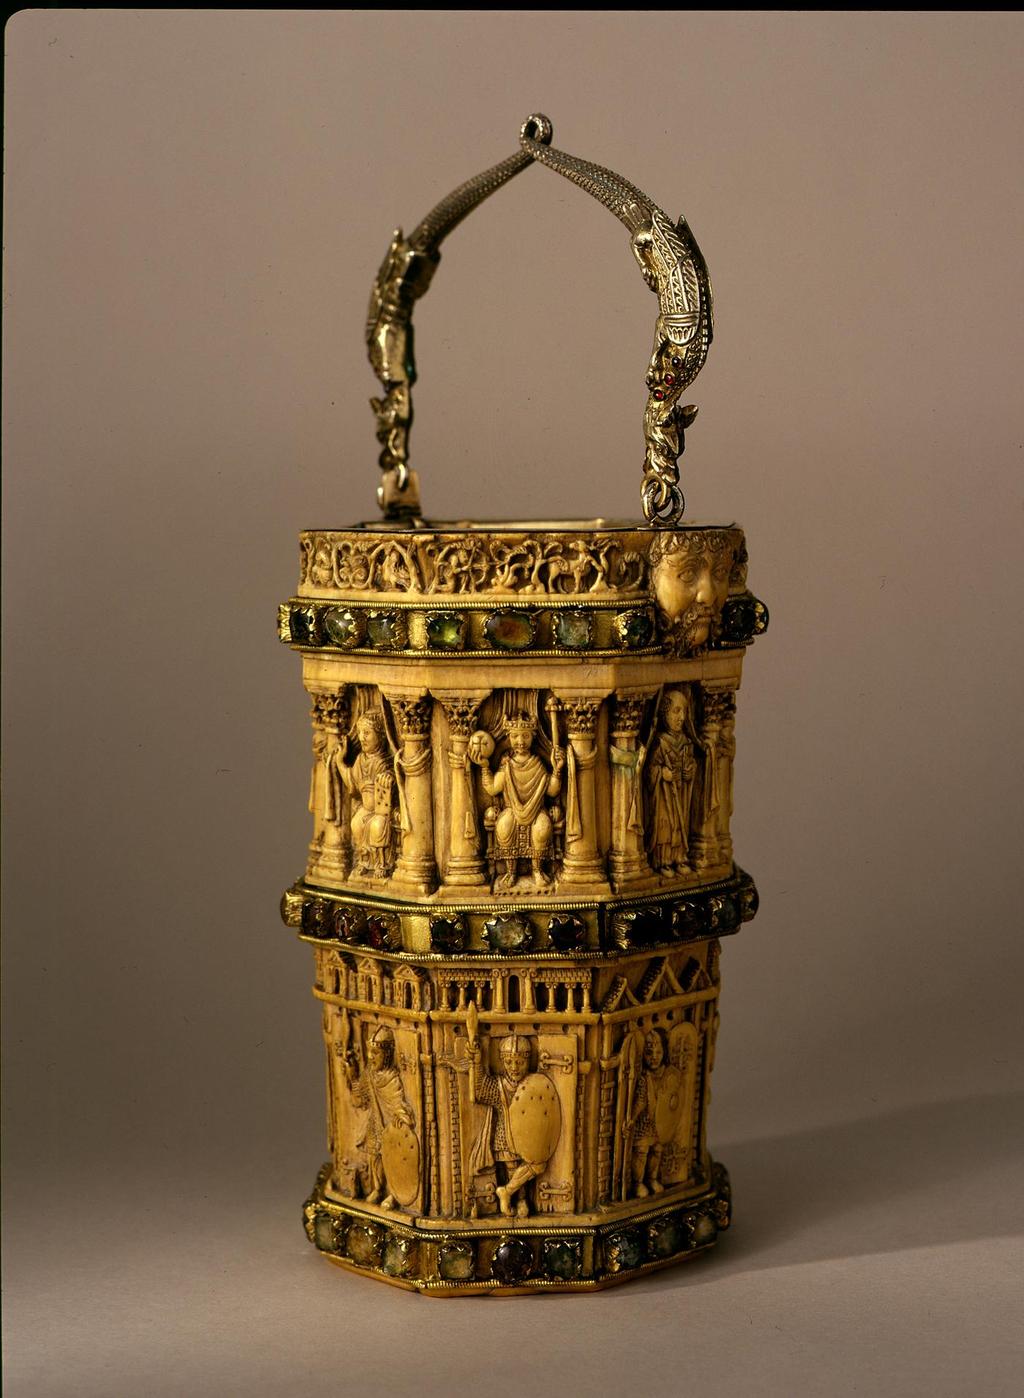 Peregrinations: Journal of Medieval Art and Architecture, Vol. 3, Iss. 1 [2010] Figure 17. Ivory situla, c. 1000, 17.7 cm tall.